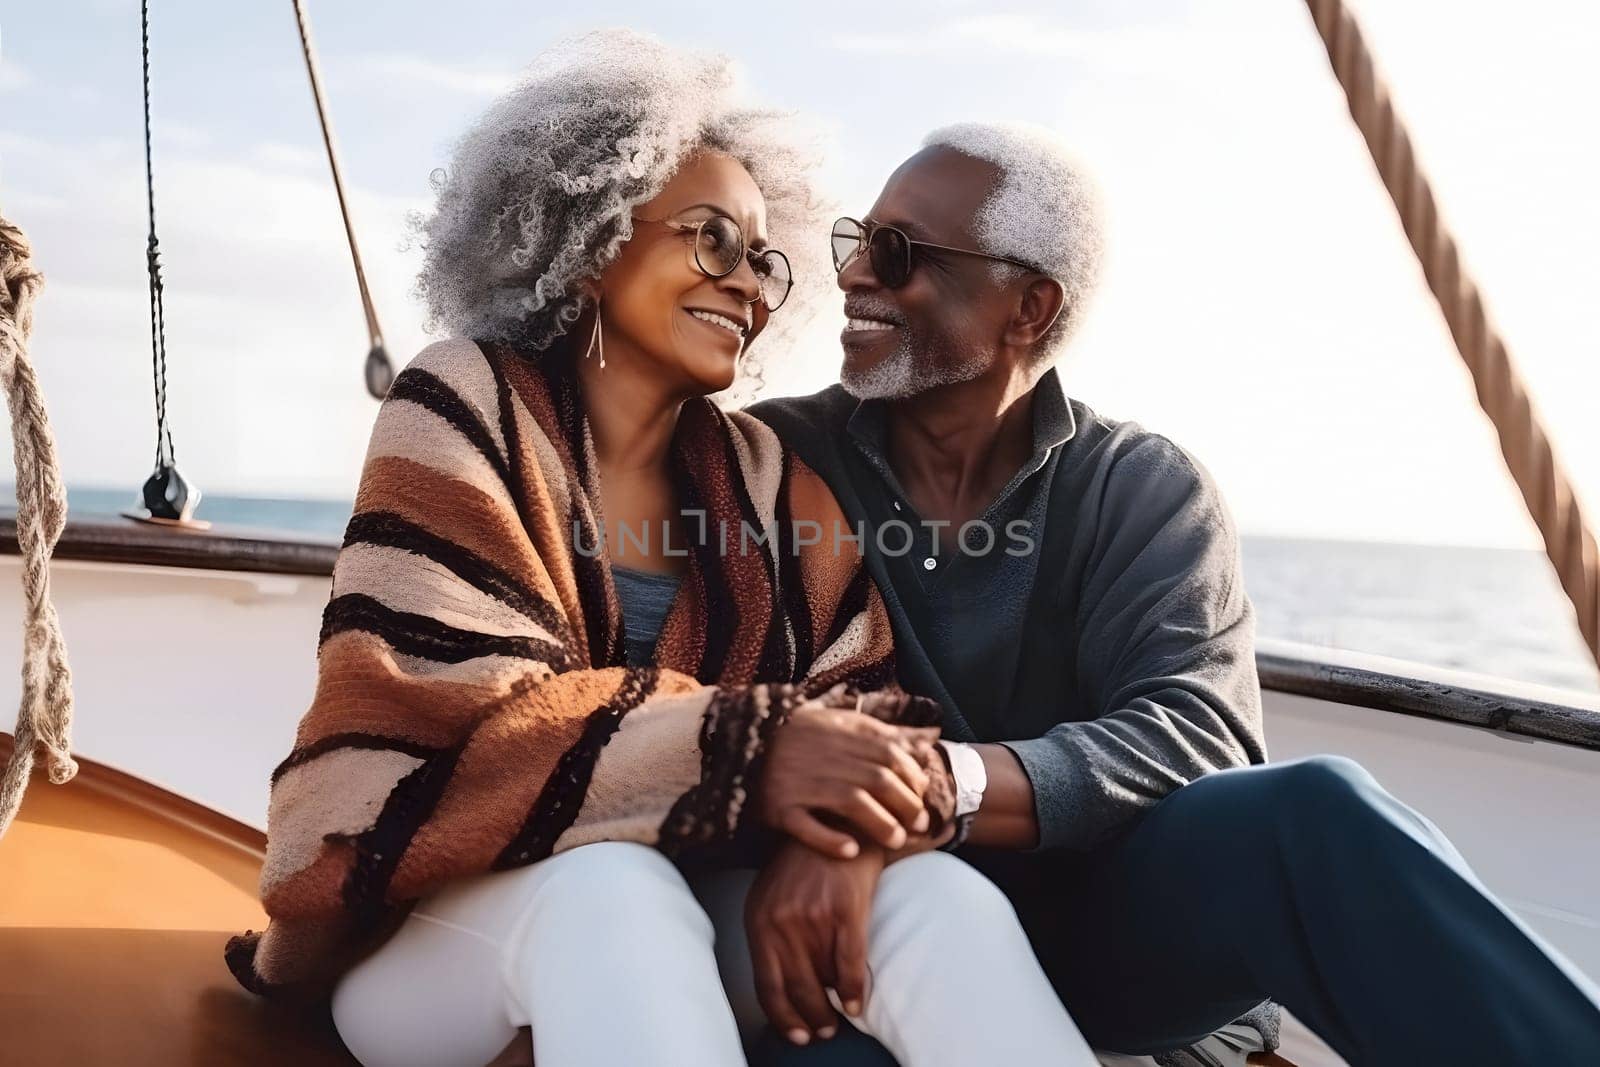 Beautiful and happy senior african american couple on a sailboat at day. Neural network generated in May 2023. Not based on any actual person, scene or pattern.